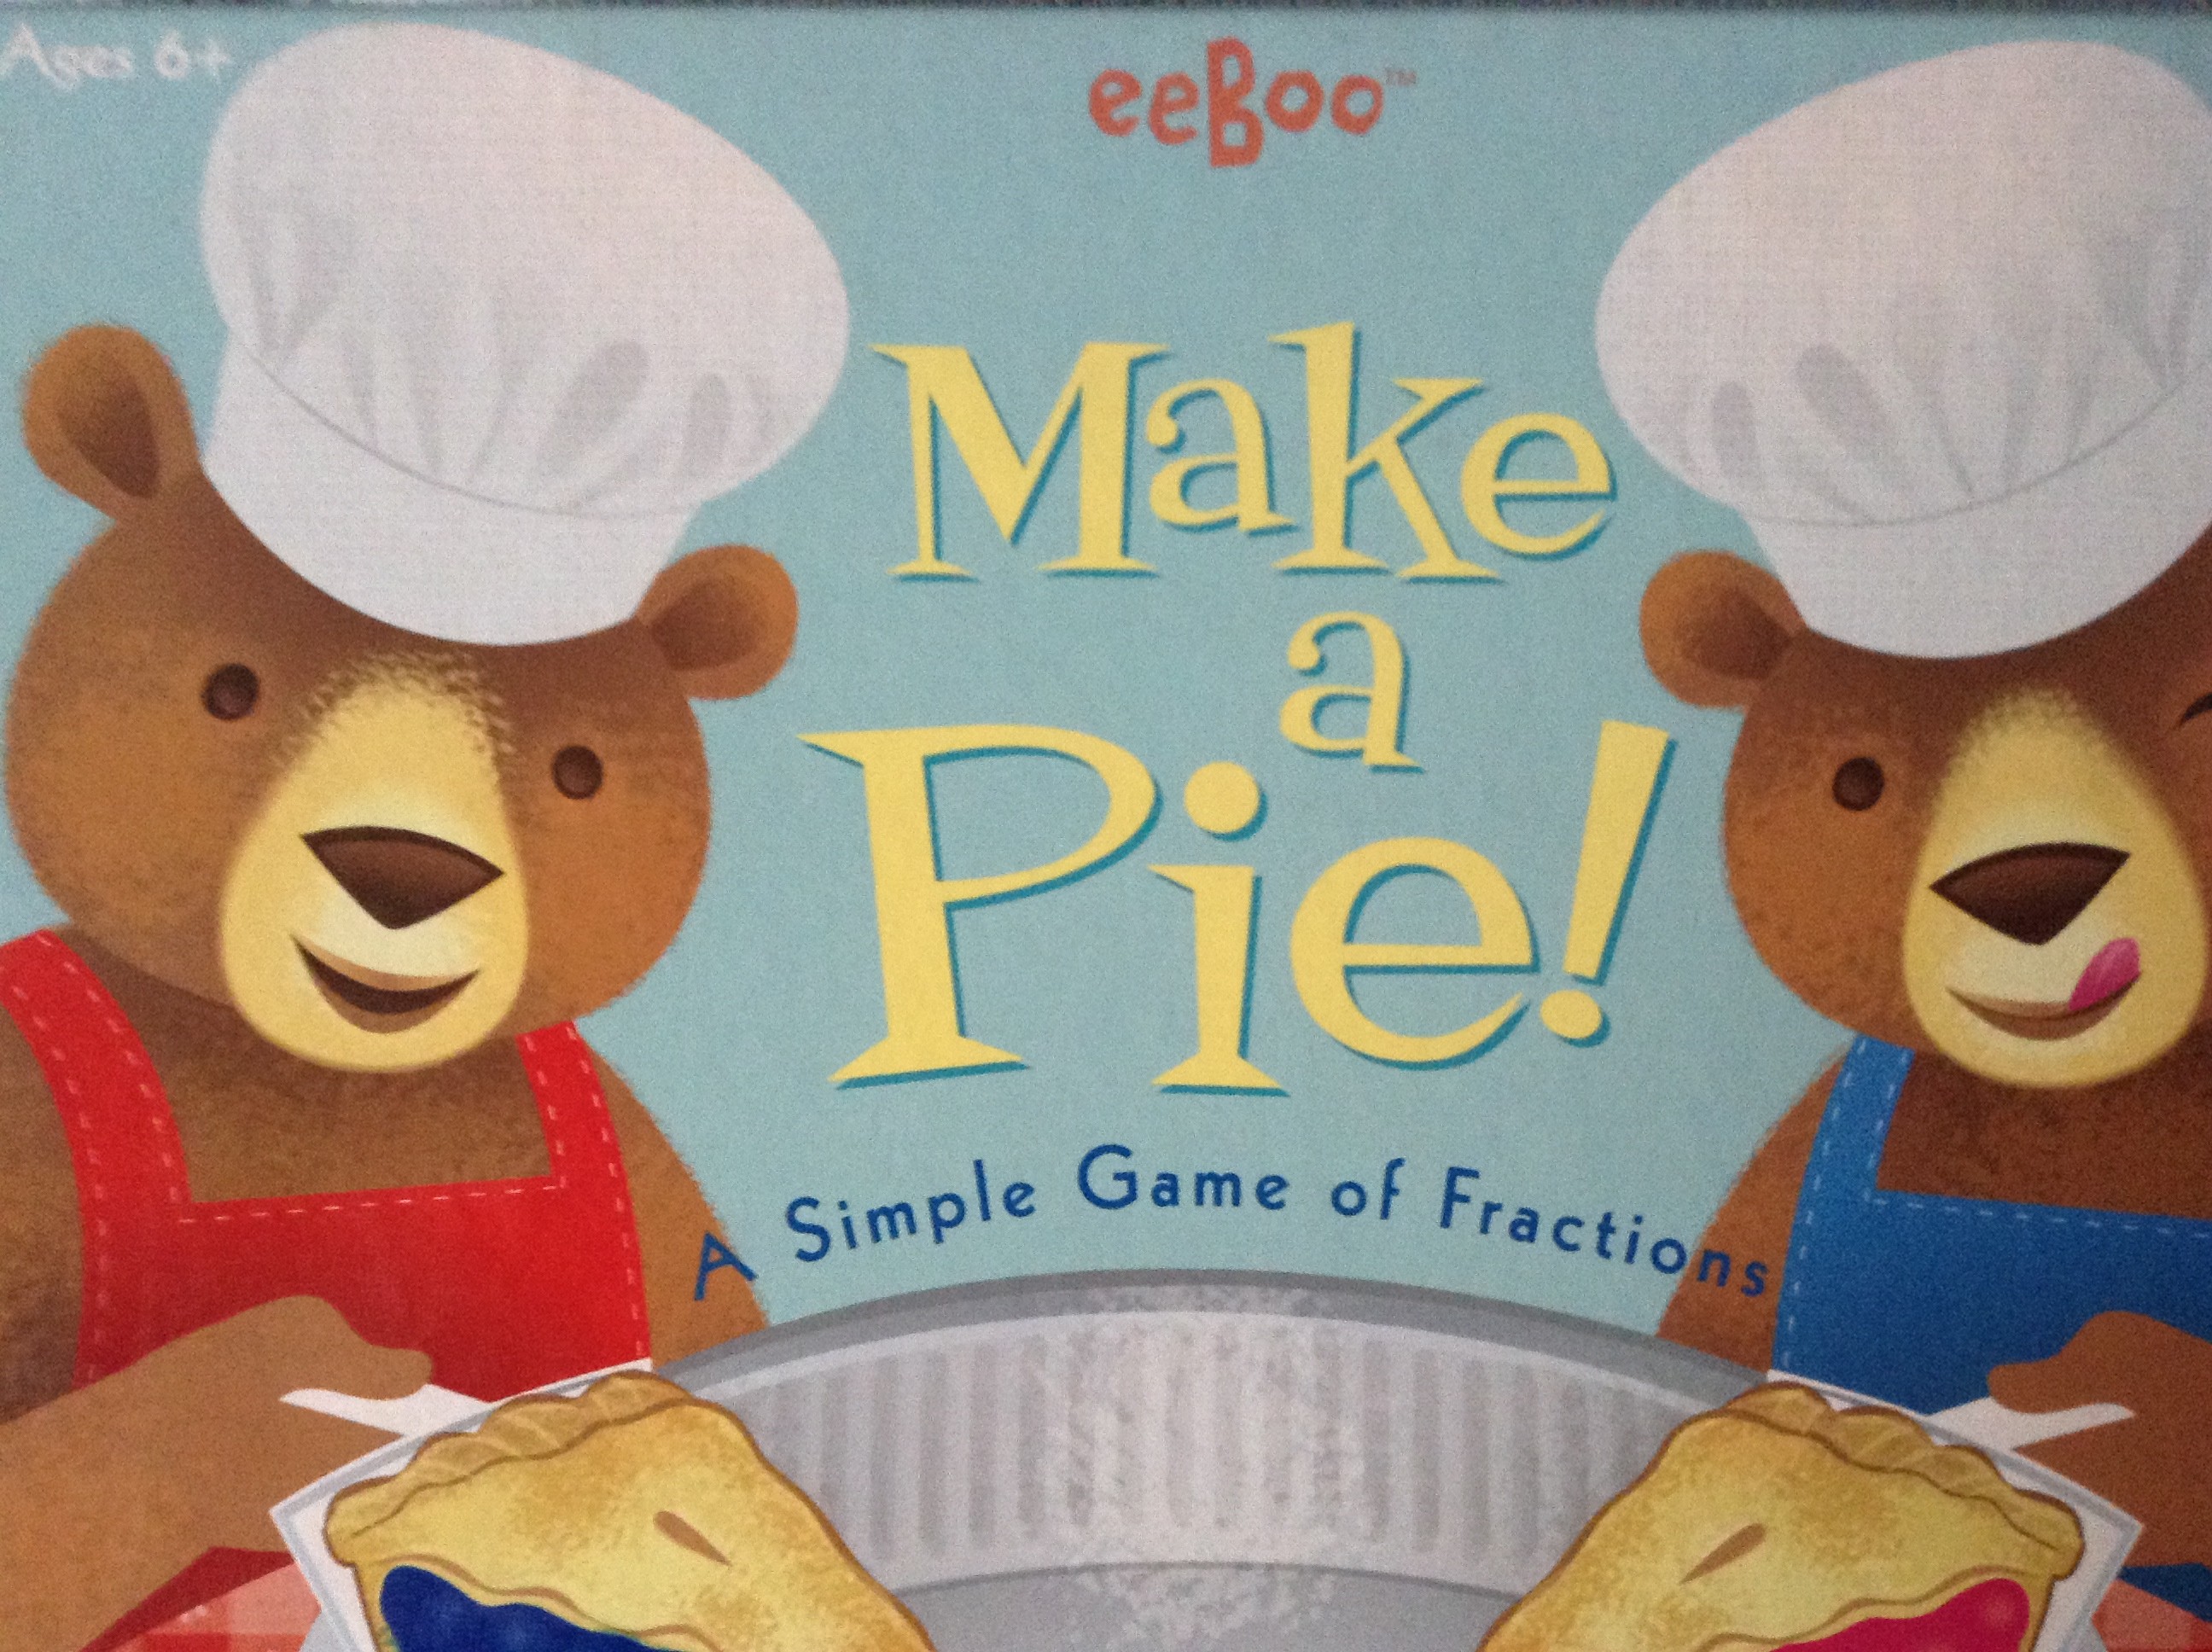 Using a simple game of fractions through a game named, Make a Pie